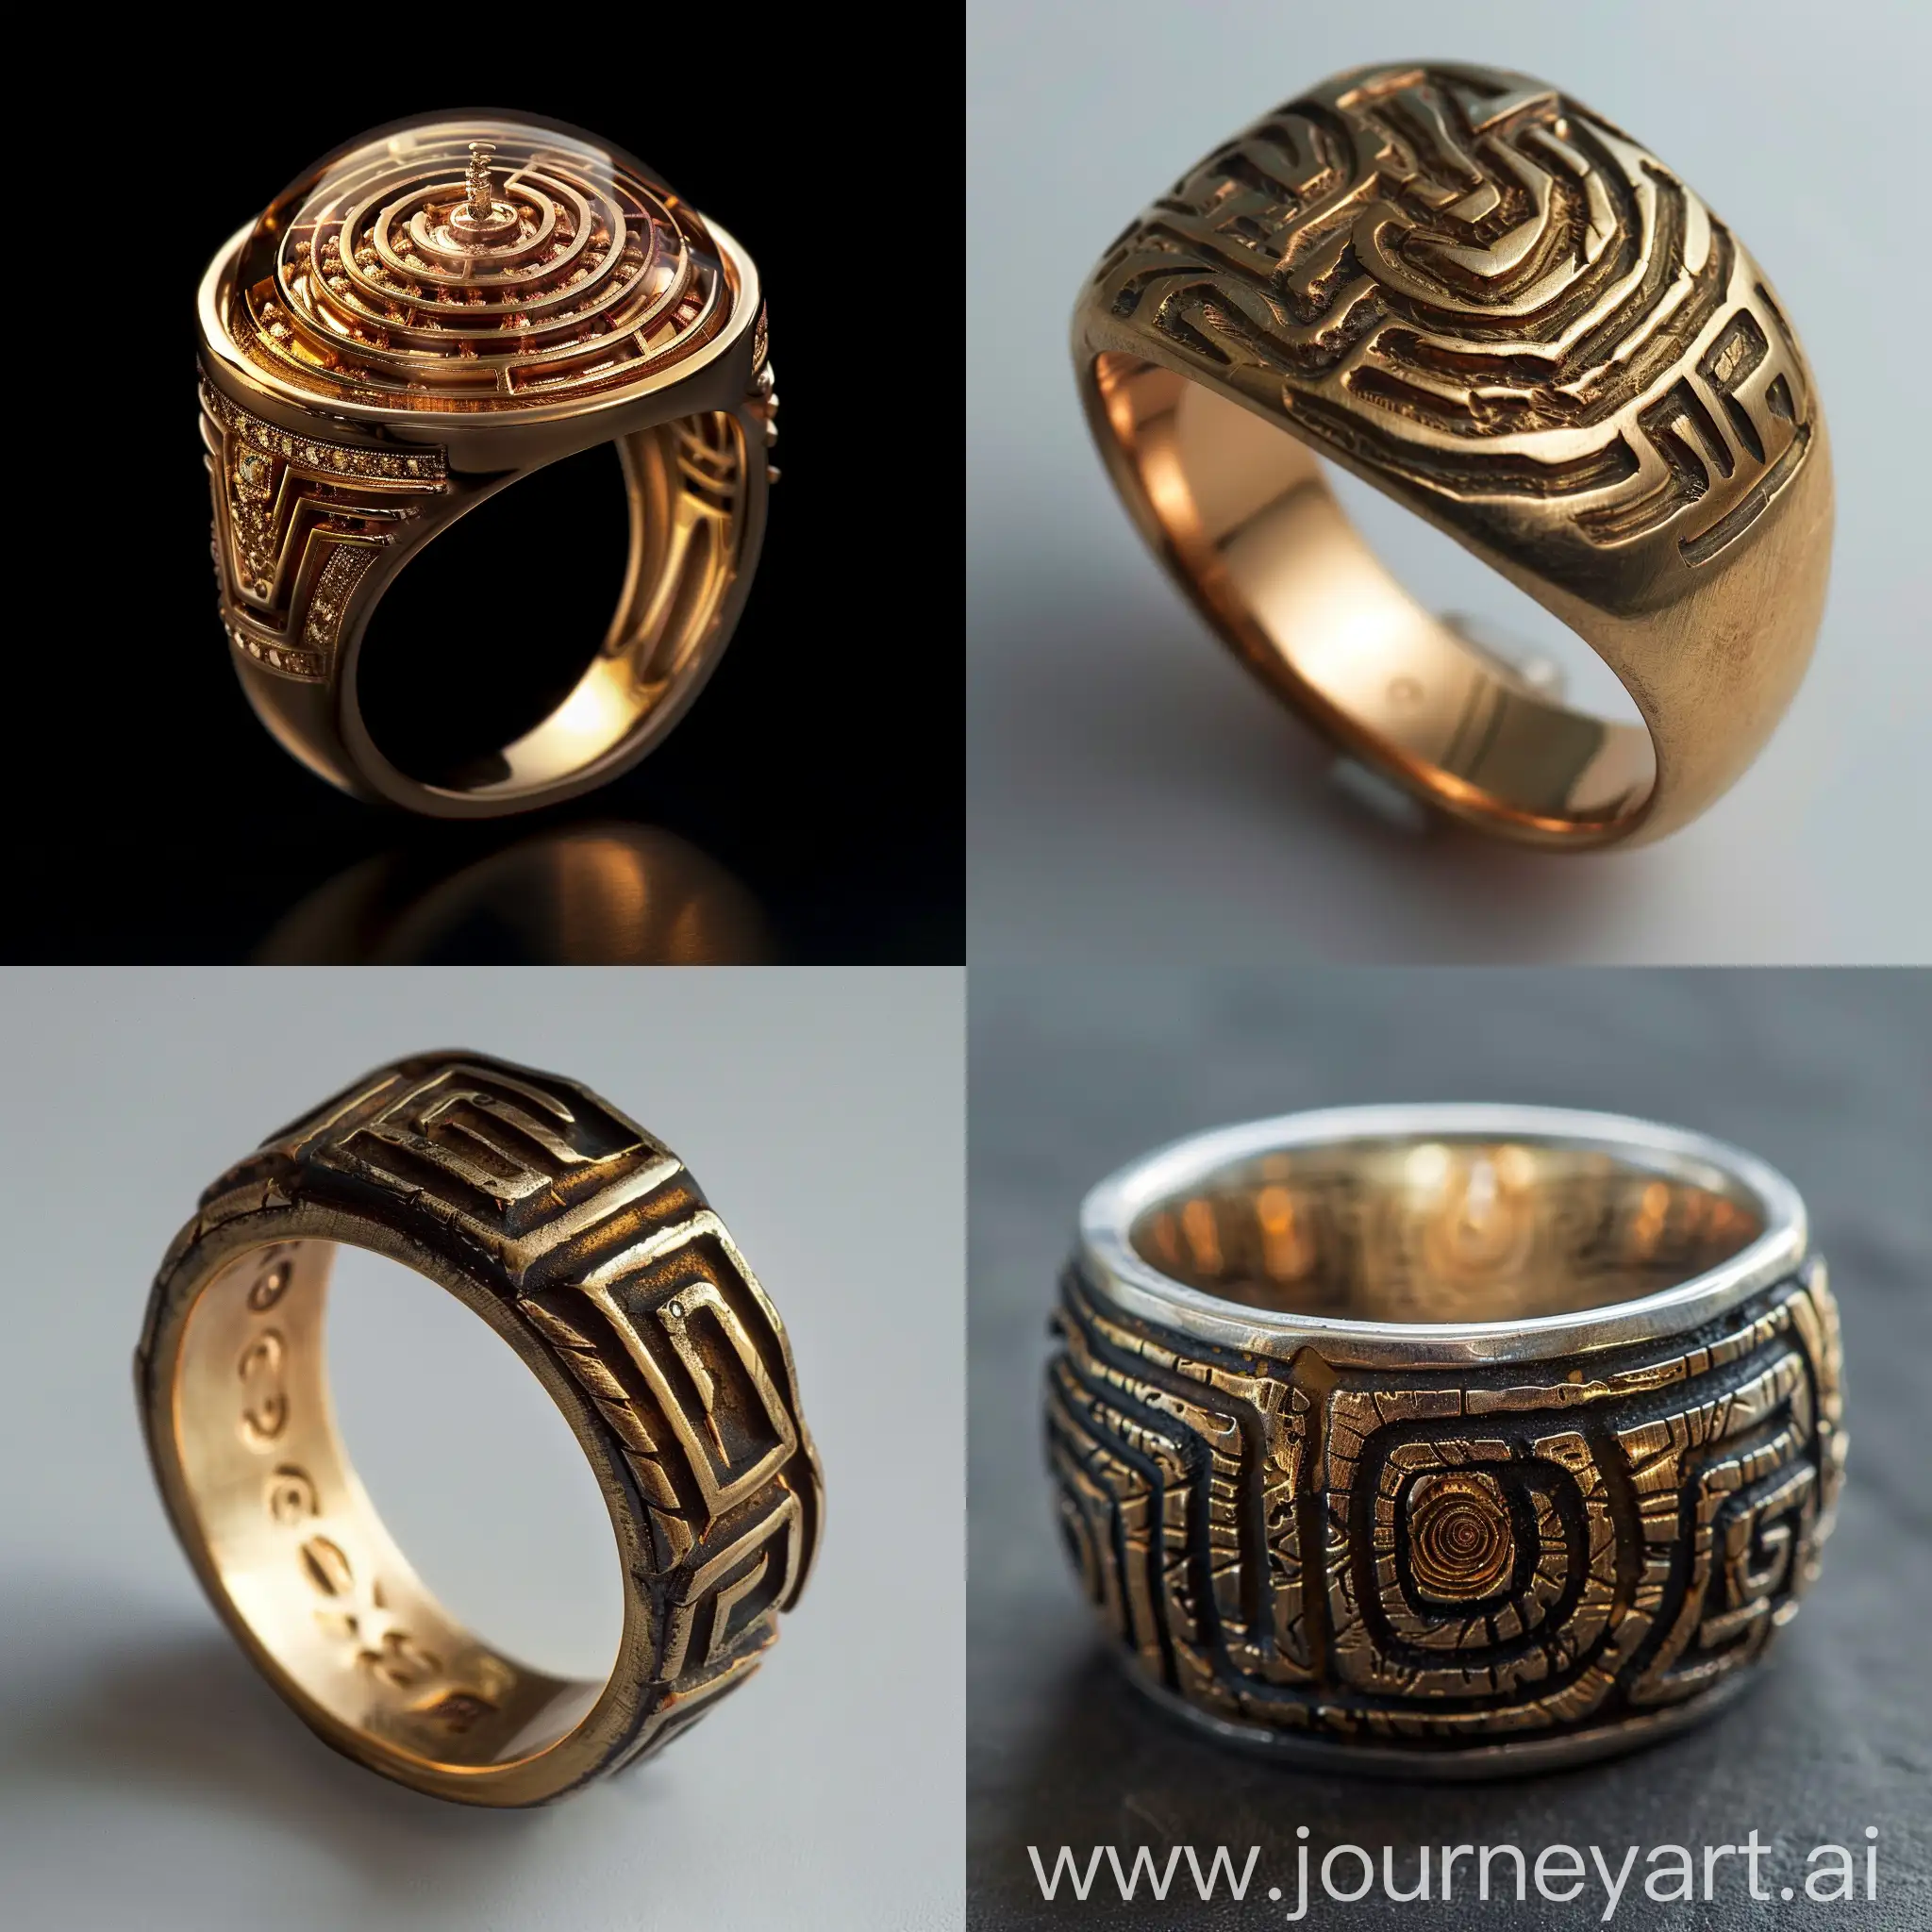 Maze-Ring-Symbolizing-Lifes-Complex-Paths-and-Quest-for-Meaning